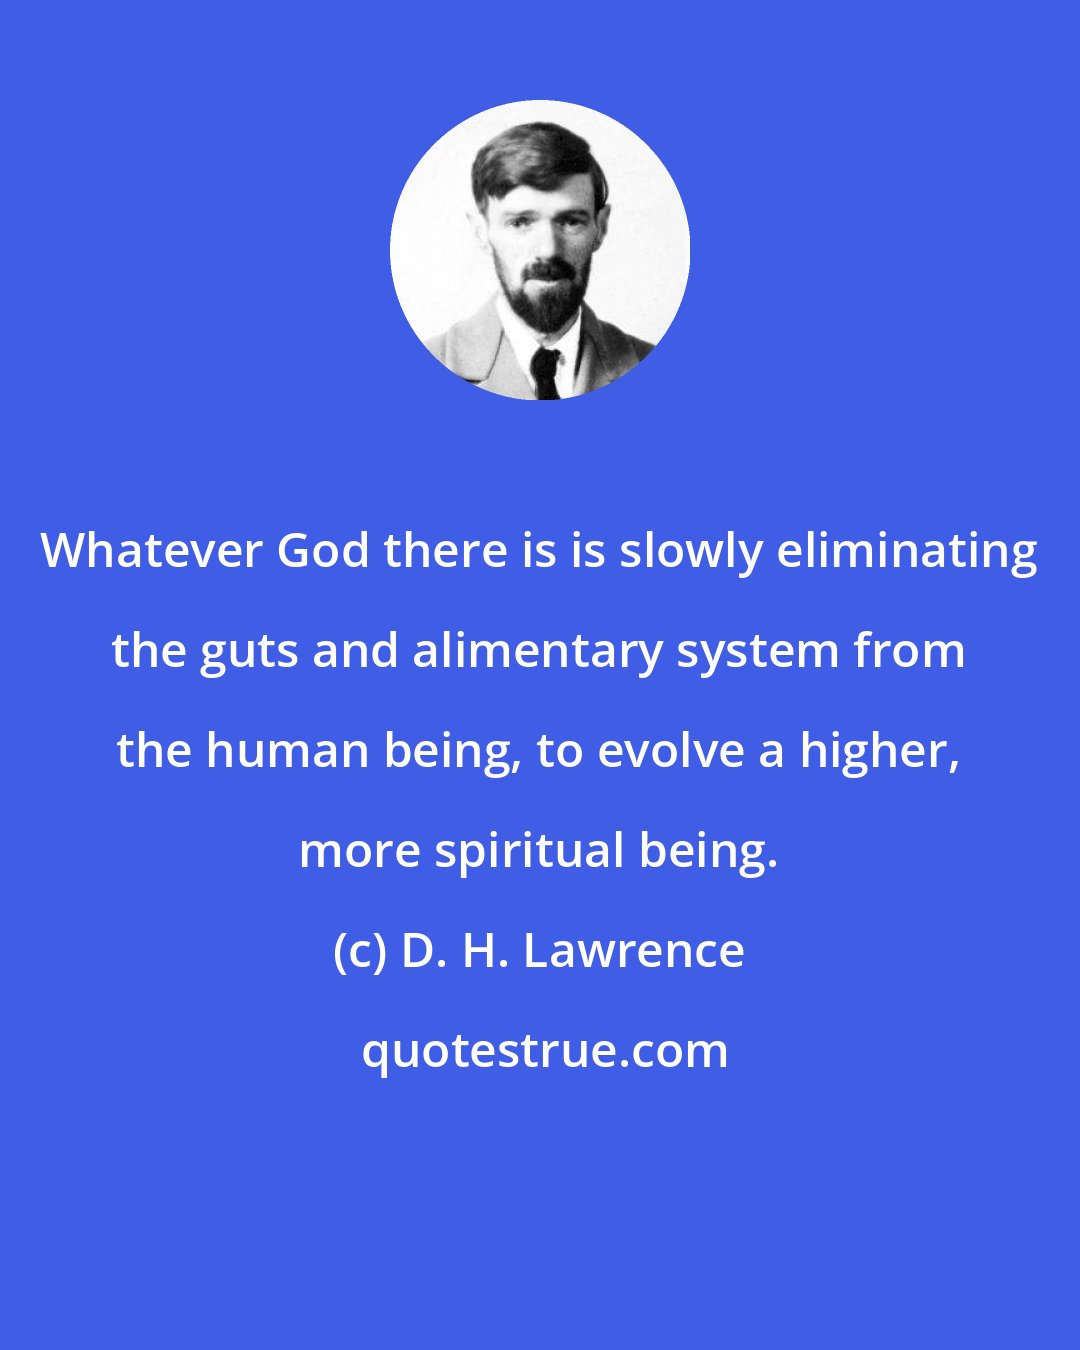 D. H. Lawrence: Whatever God there is is slowly eliminating the guts and alimentary system from the human being, to evolve a higher, more spiritual being.